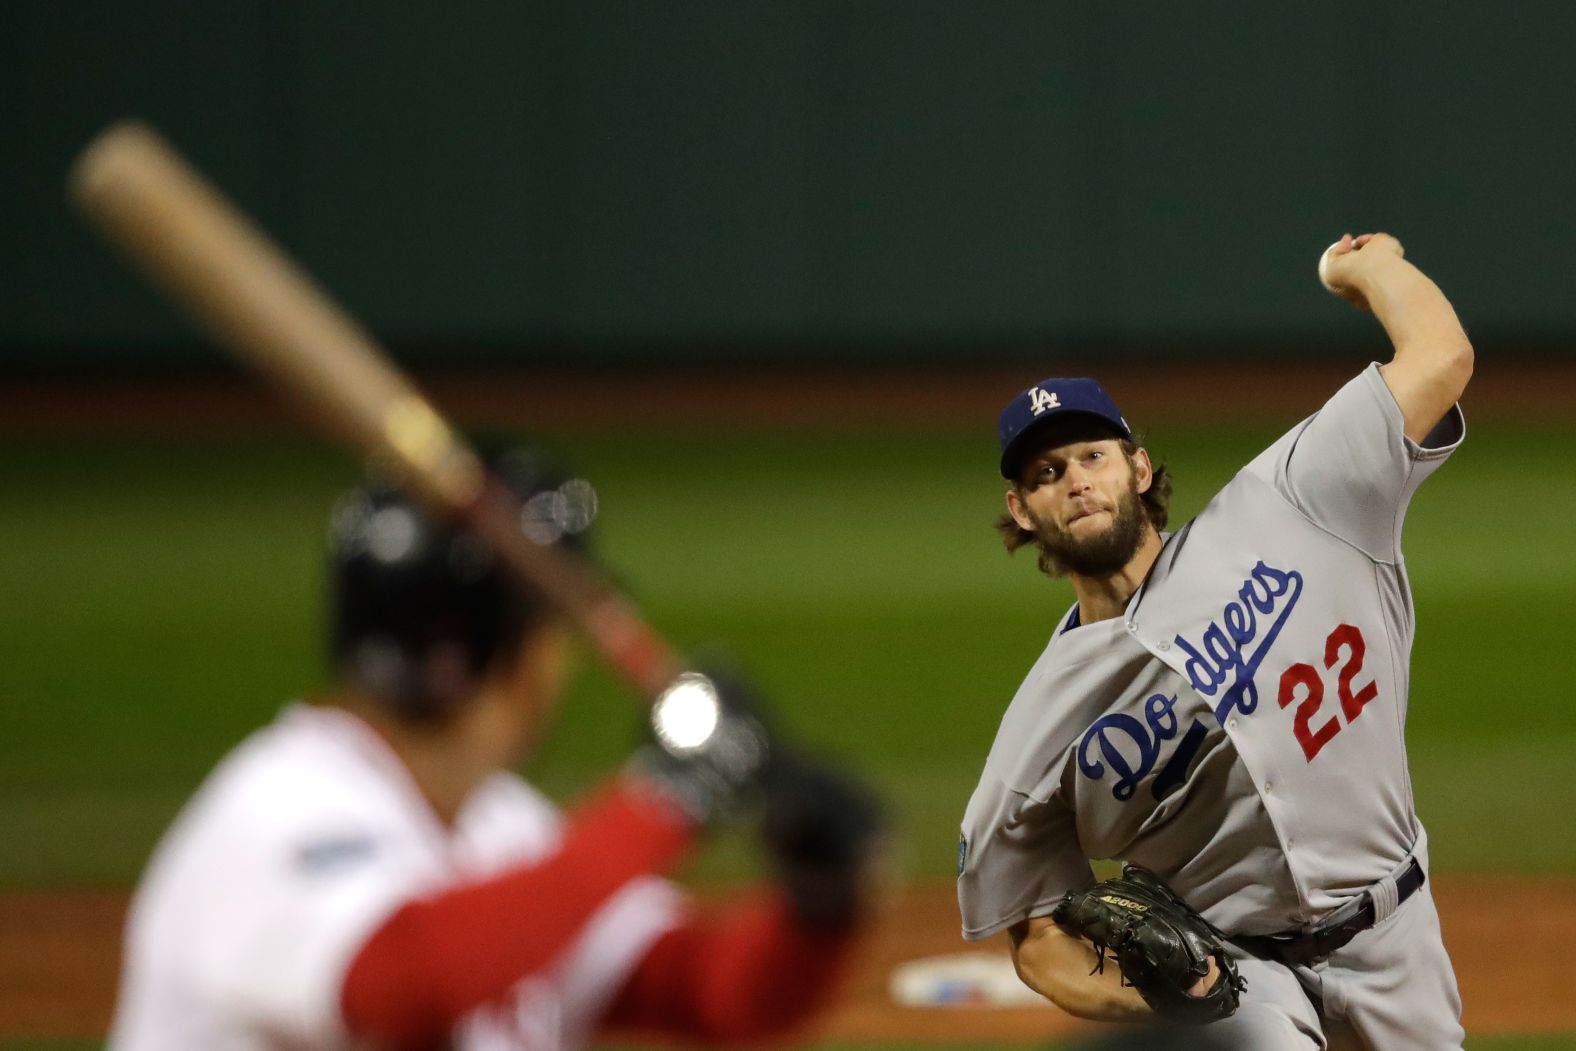 Clayton Kershaw of the Los Angeles Dodgers delivers a pitch during the first inning against the Boston Red Sox in Game 1. Kershaw was given the loss after giving up five runs over four innings pitched.